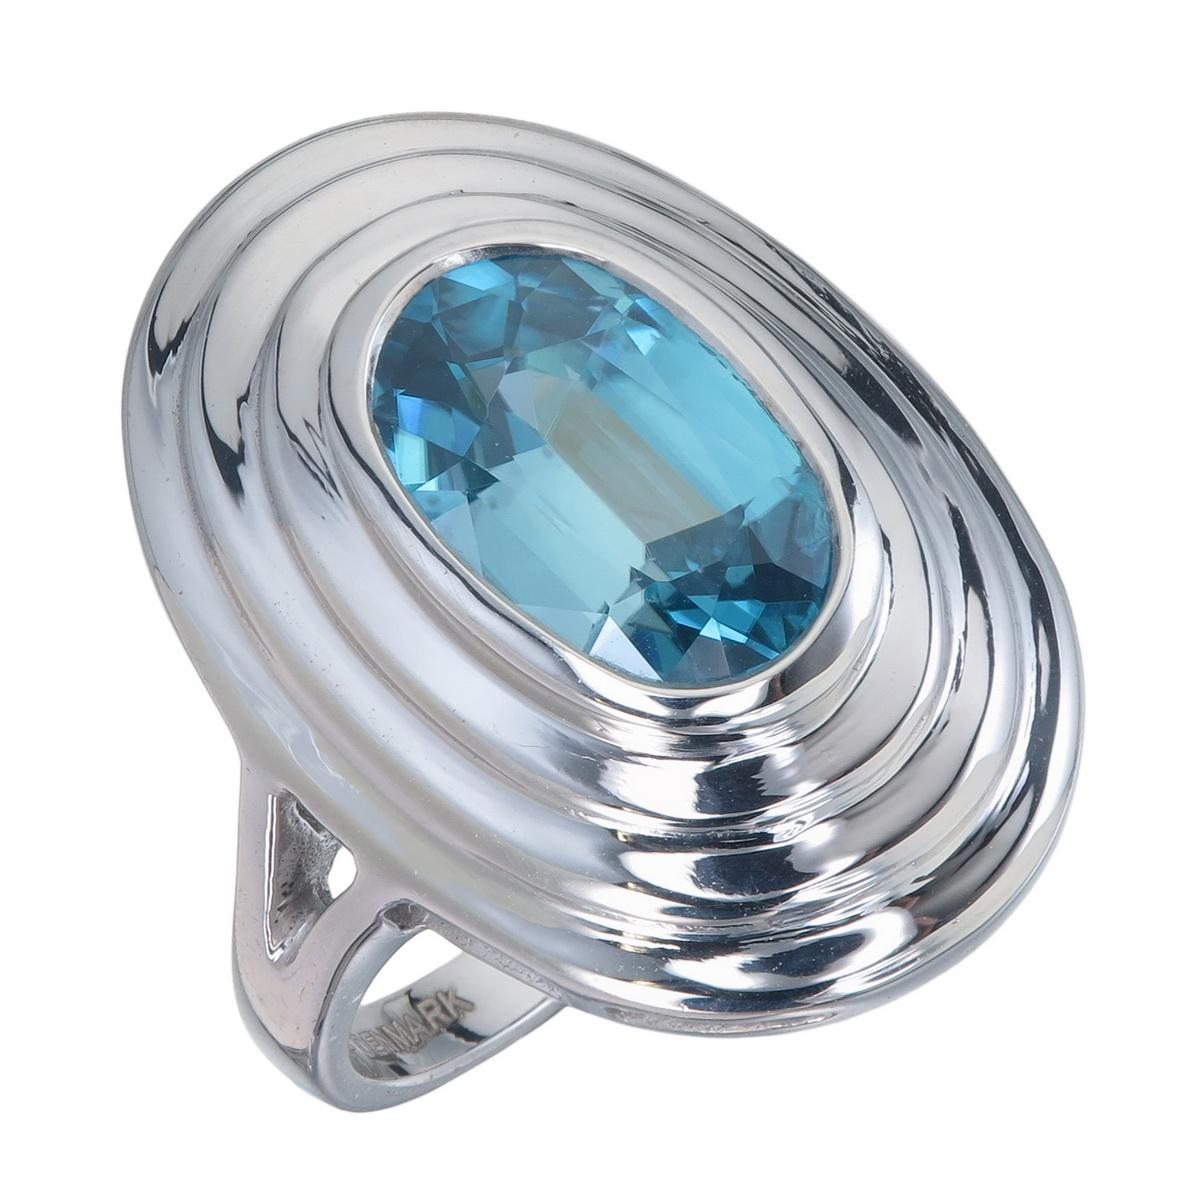 Orloff of Denmark; 4.68 carat Metallic Blue Zircon set in a Triple-Bezel 925 Sterling Silver Ring.

Featured on this peace is a natural blue zircon mined in Ratanakiri, Cambodia and later re-cut in Bangkok, Thailand.
The unique blue of the zircon